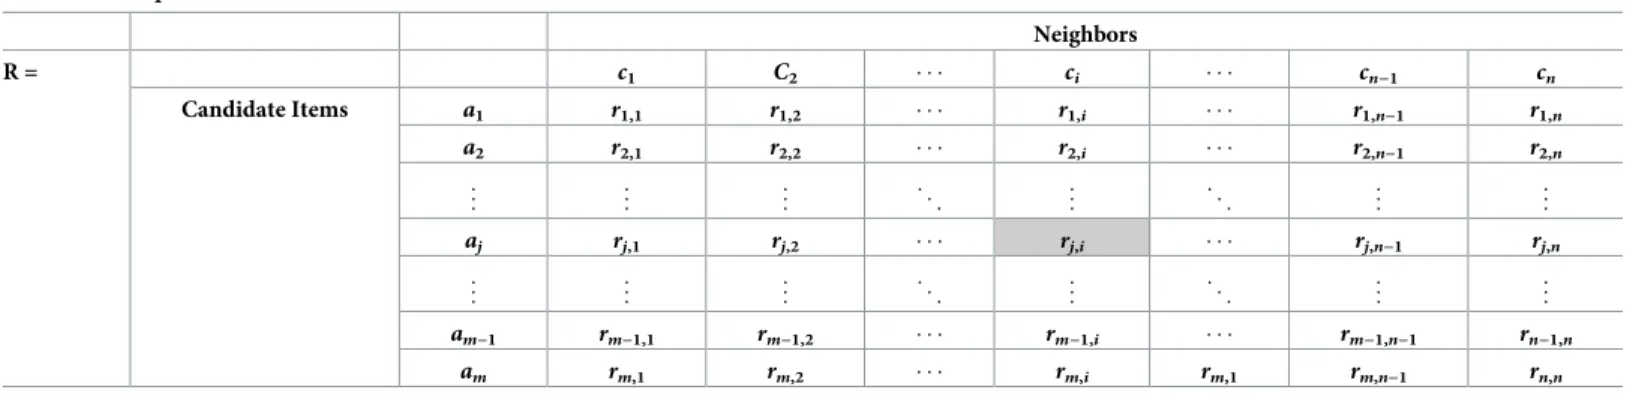 Table 4 presents a weighted normalized decision matrix V obtained by applying Eq (17) to the normalized decision matrix R.